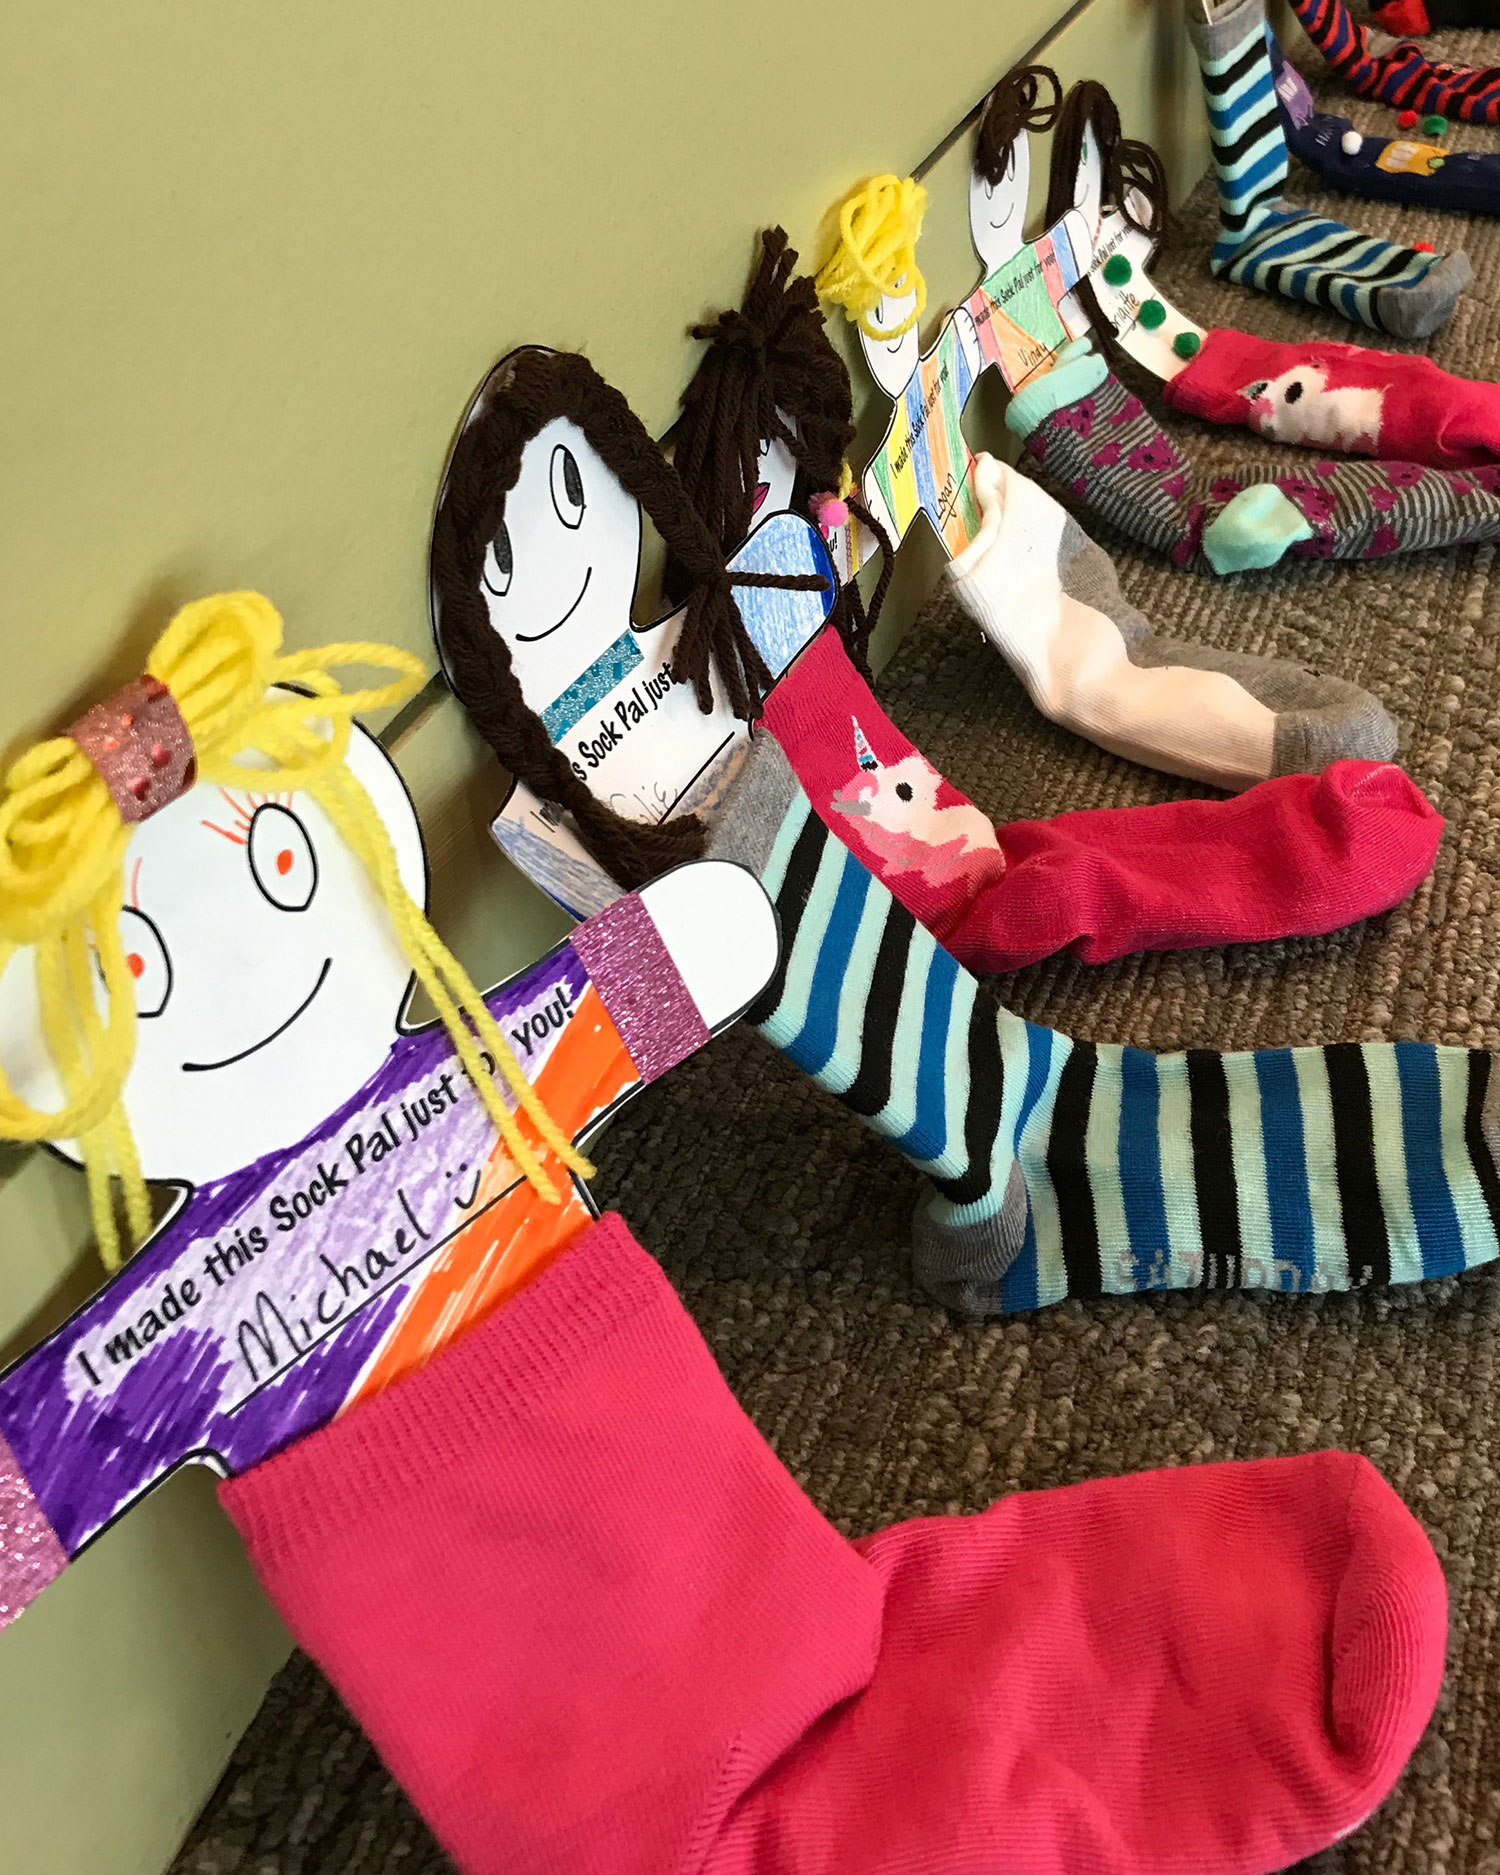 SockPals that can be created for children in need // courtesy Mission Possible Kids